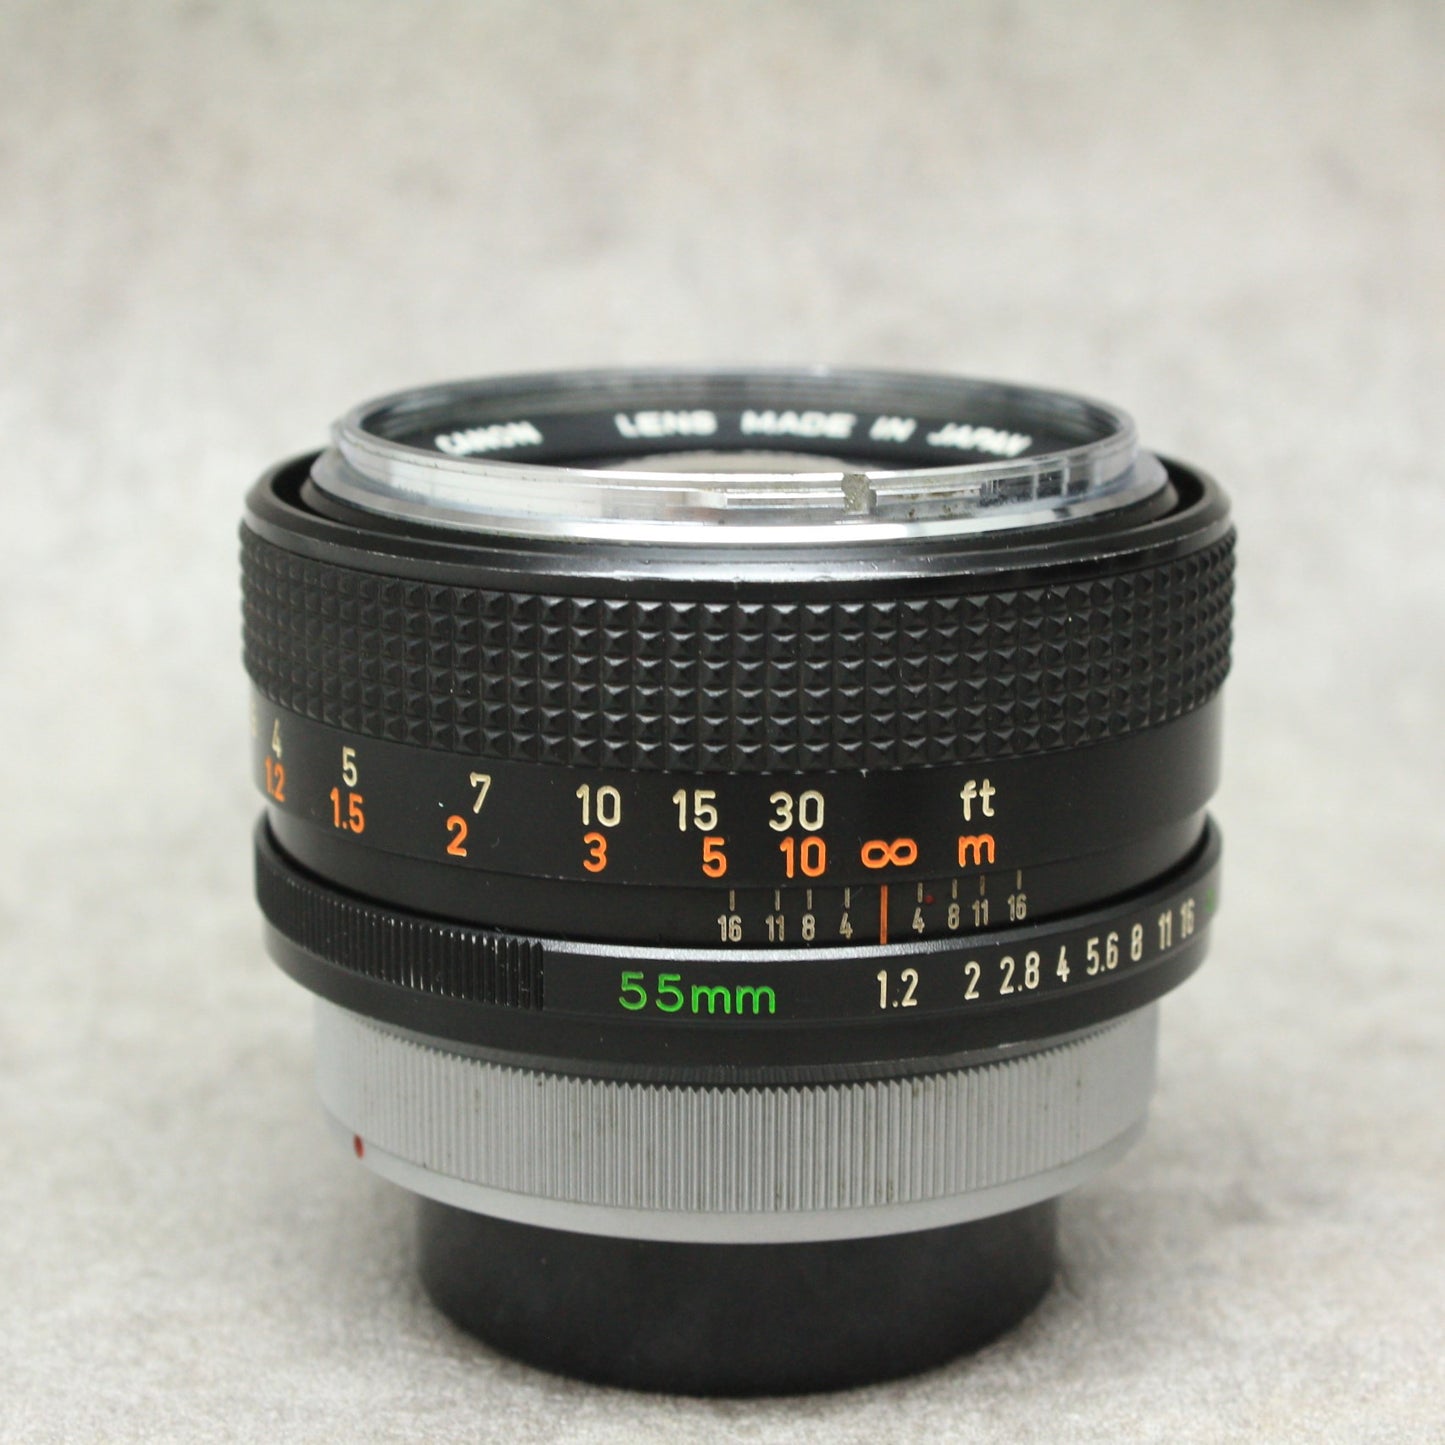 Canon キャノン FD 55mm 高級単焦点 1.2 希少